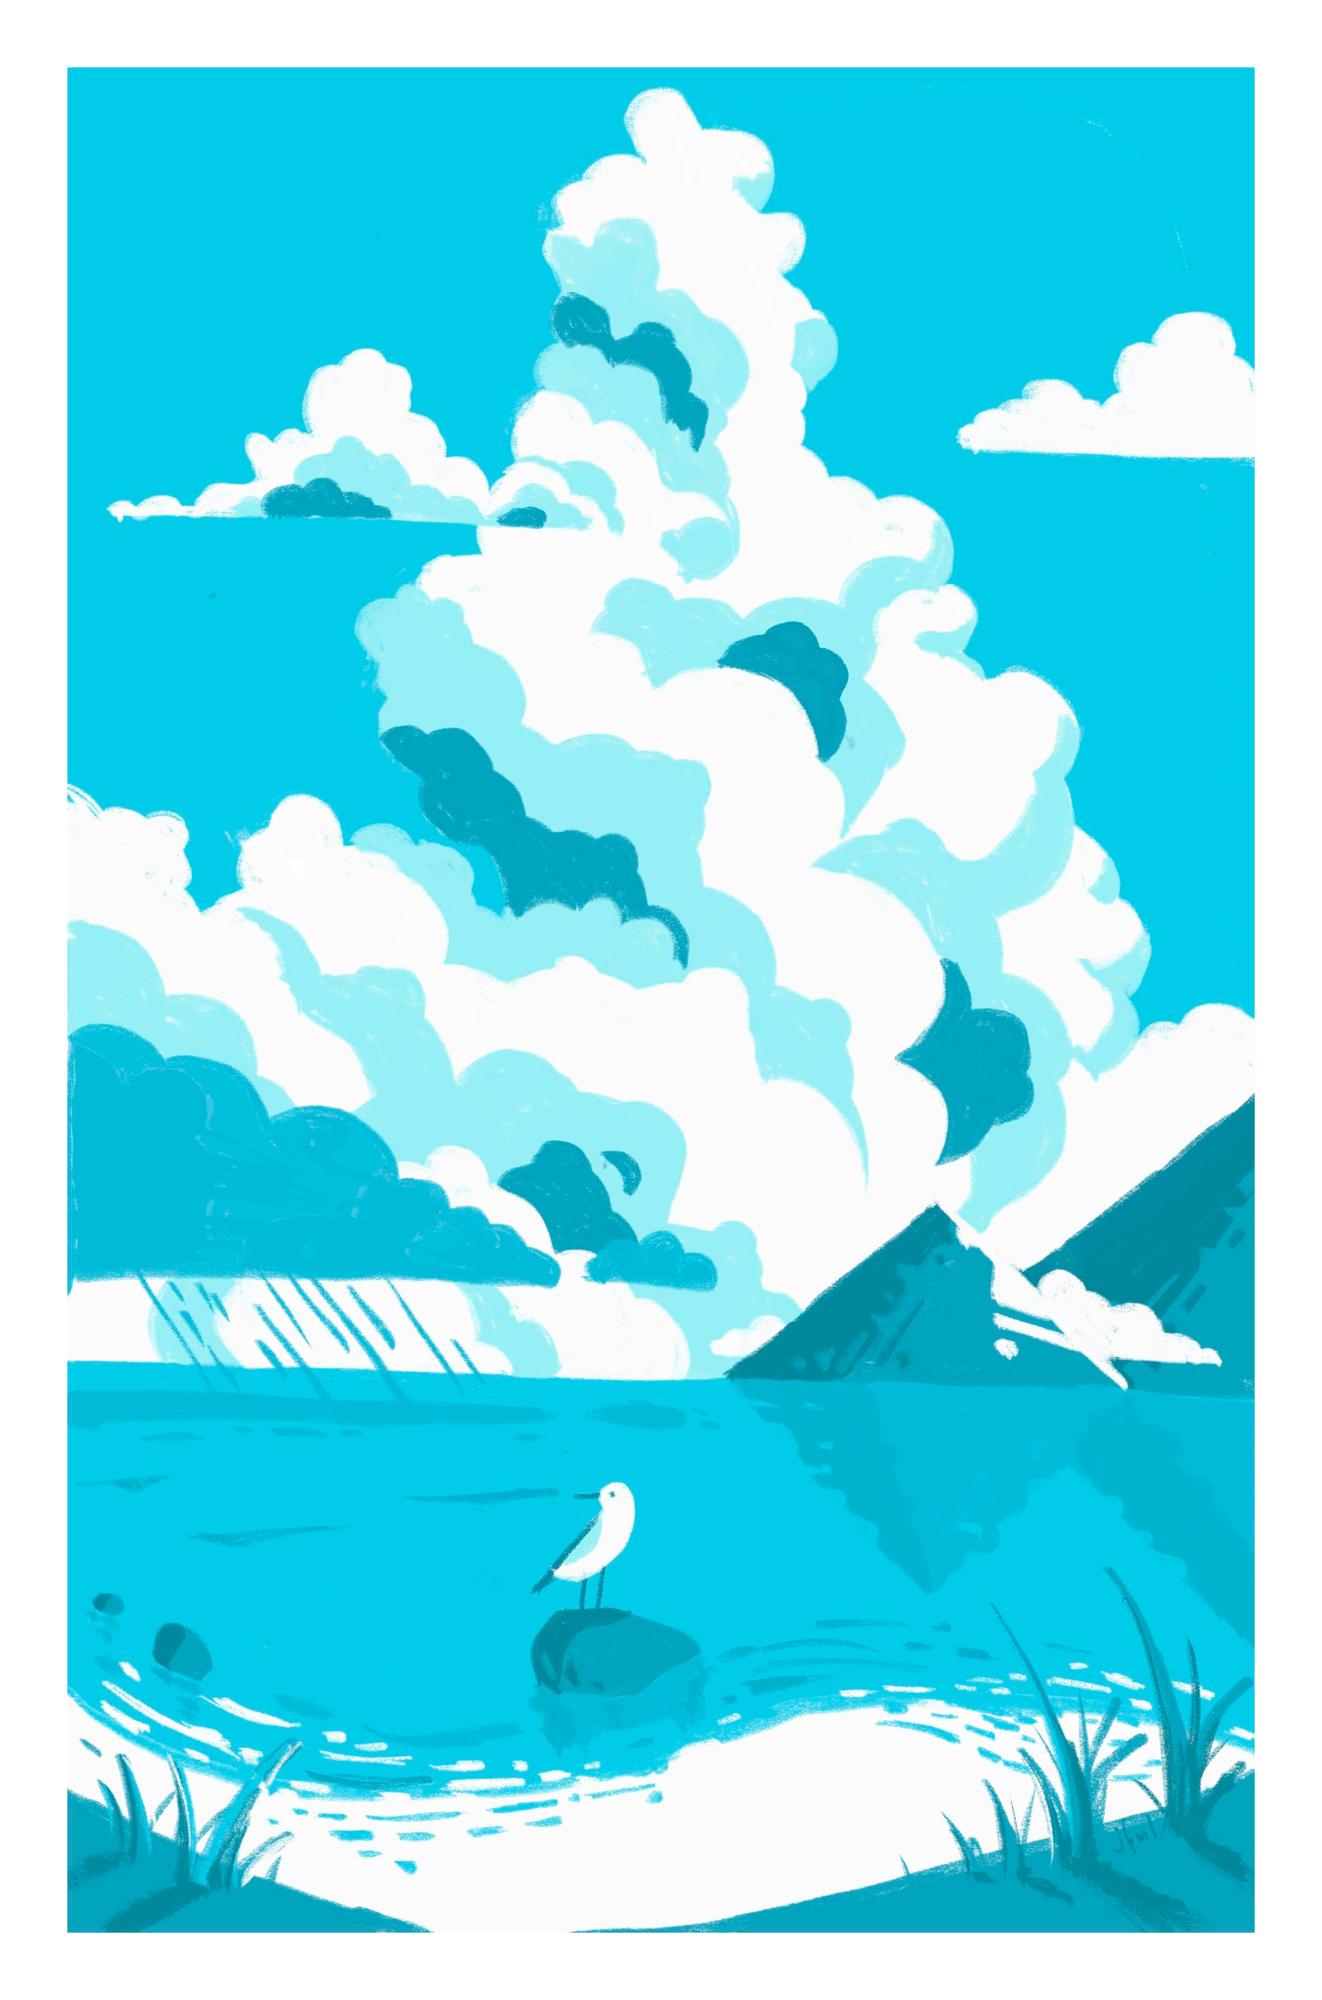 A seagull is sitting on a rock in the shallow waters of a beach. There's a towering anime cloud and mountains in the background. Illustrated in light blue tones.